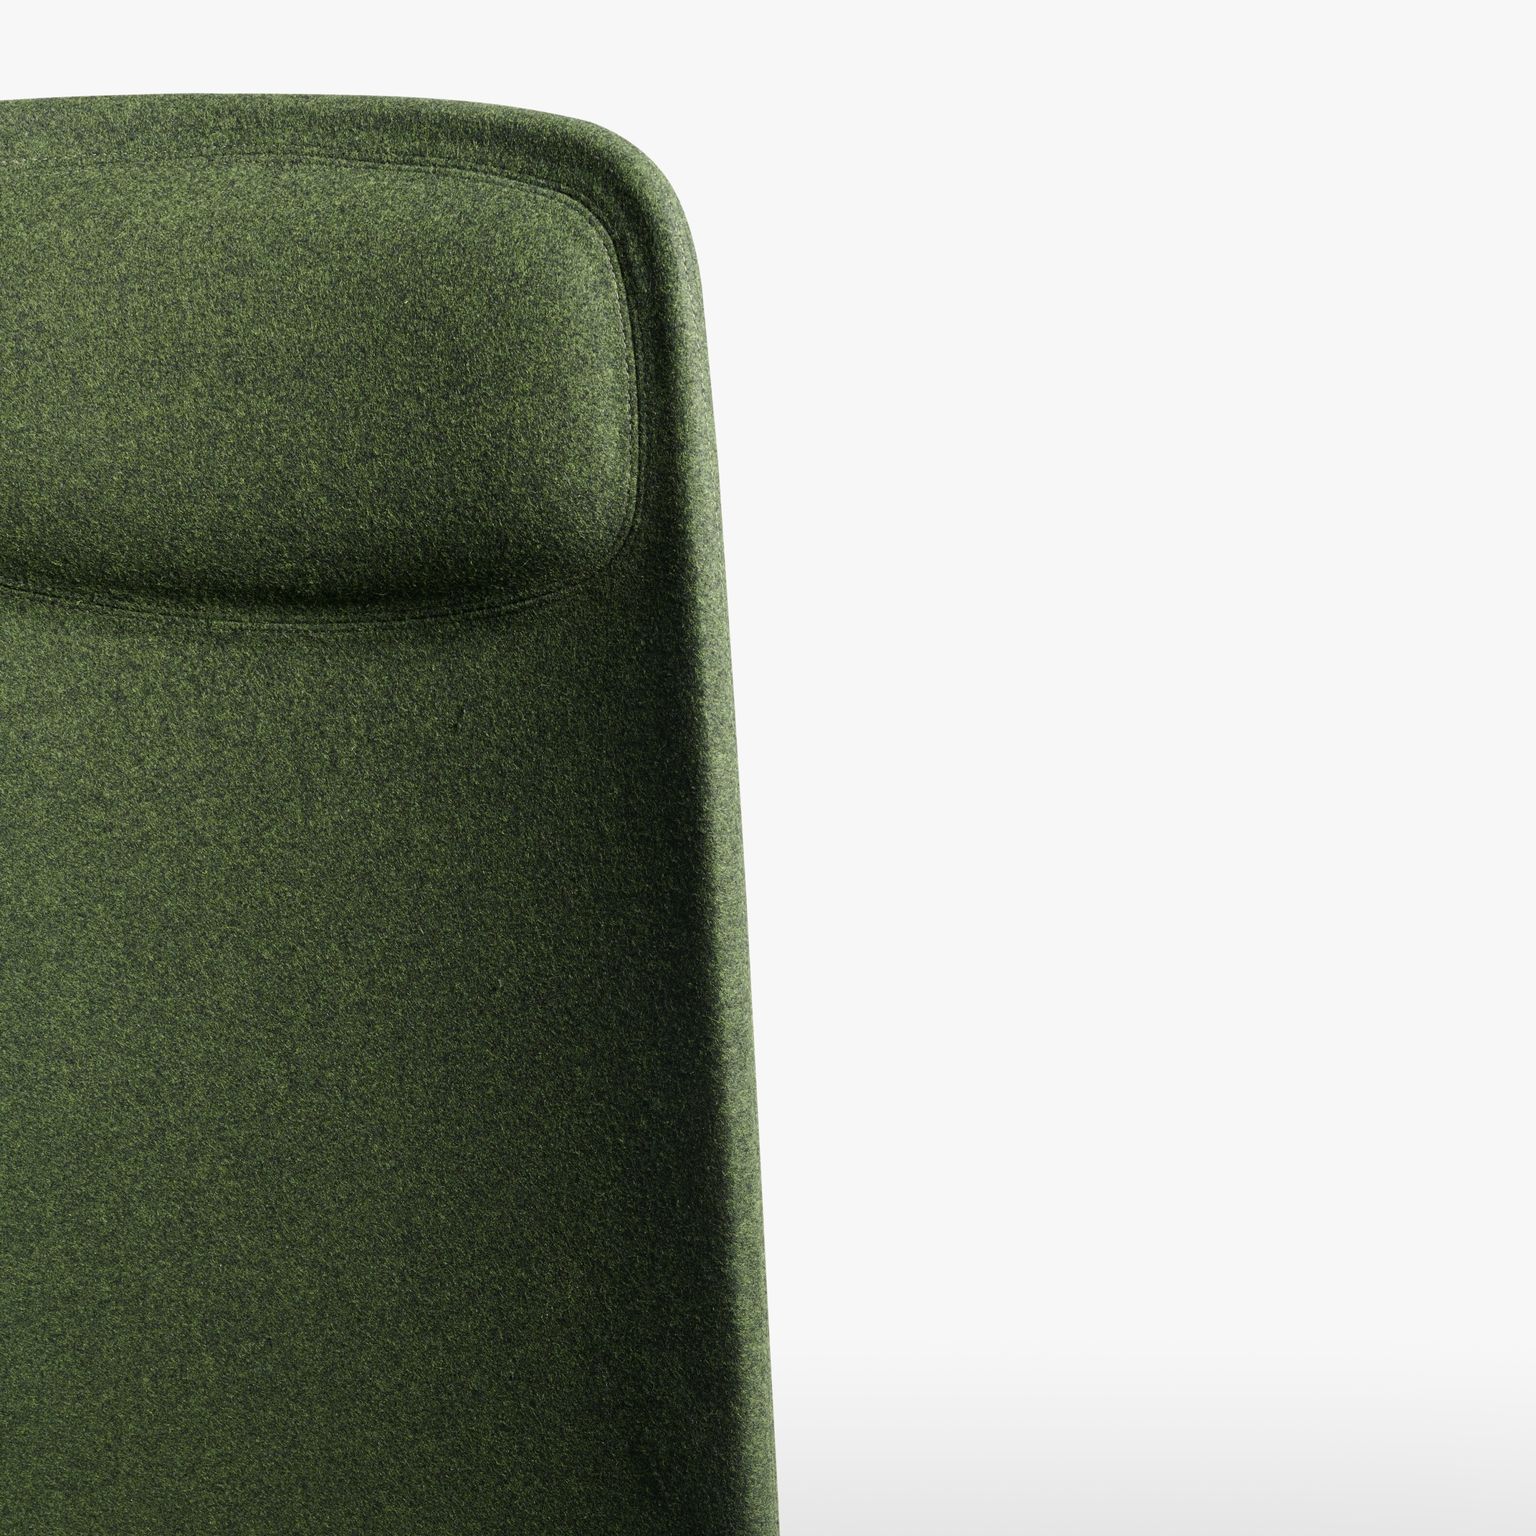 LAND lounge chair upholstered